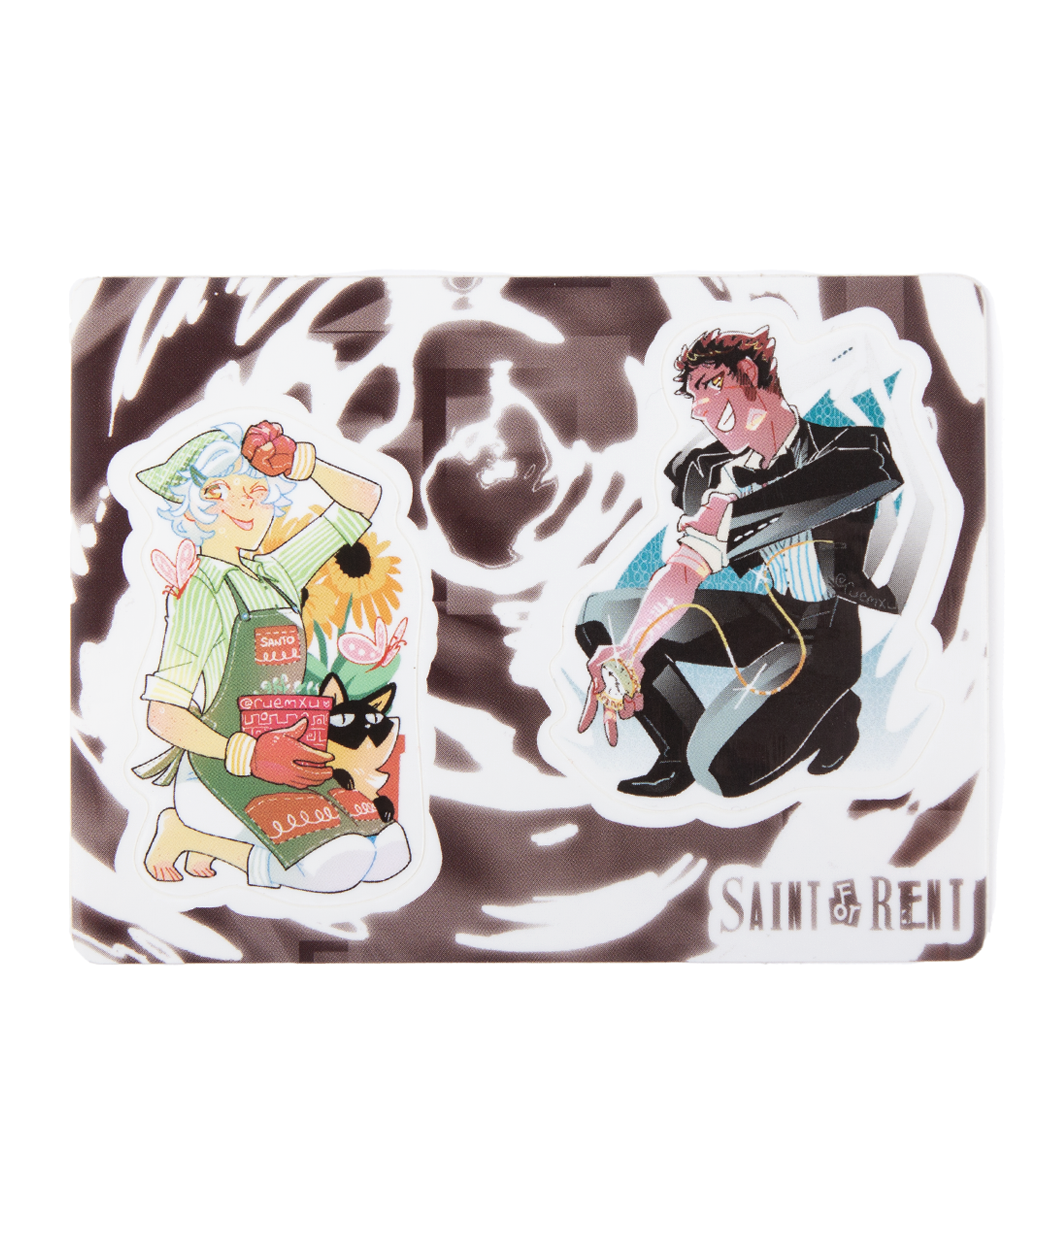 A sticker sheet of one sticker of Armand and one of Saint from Ru Xu. 